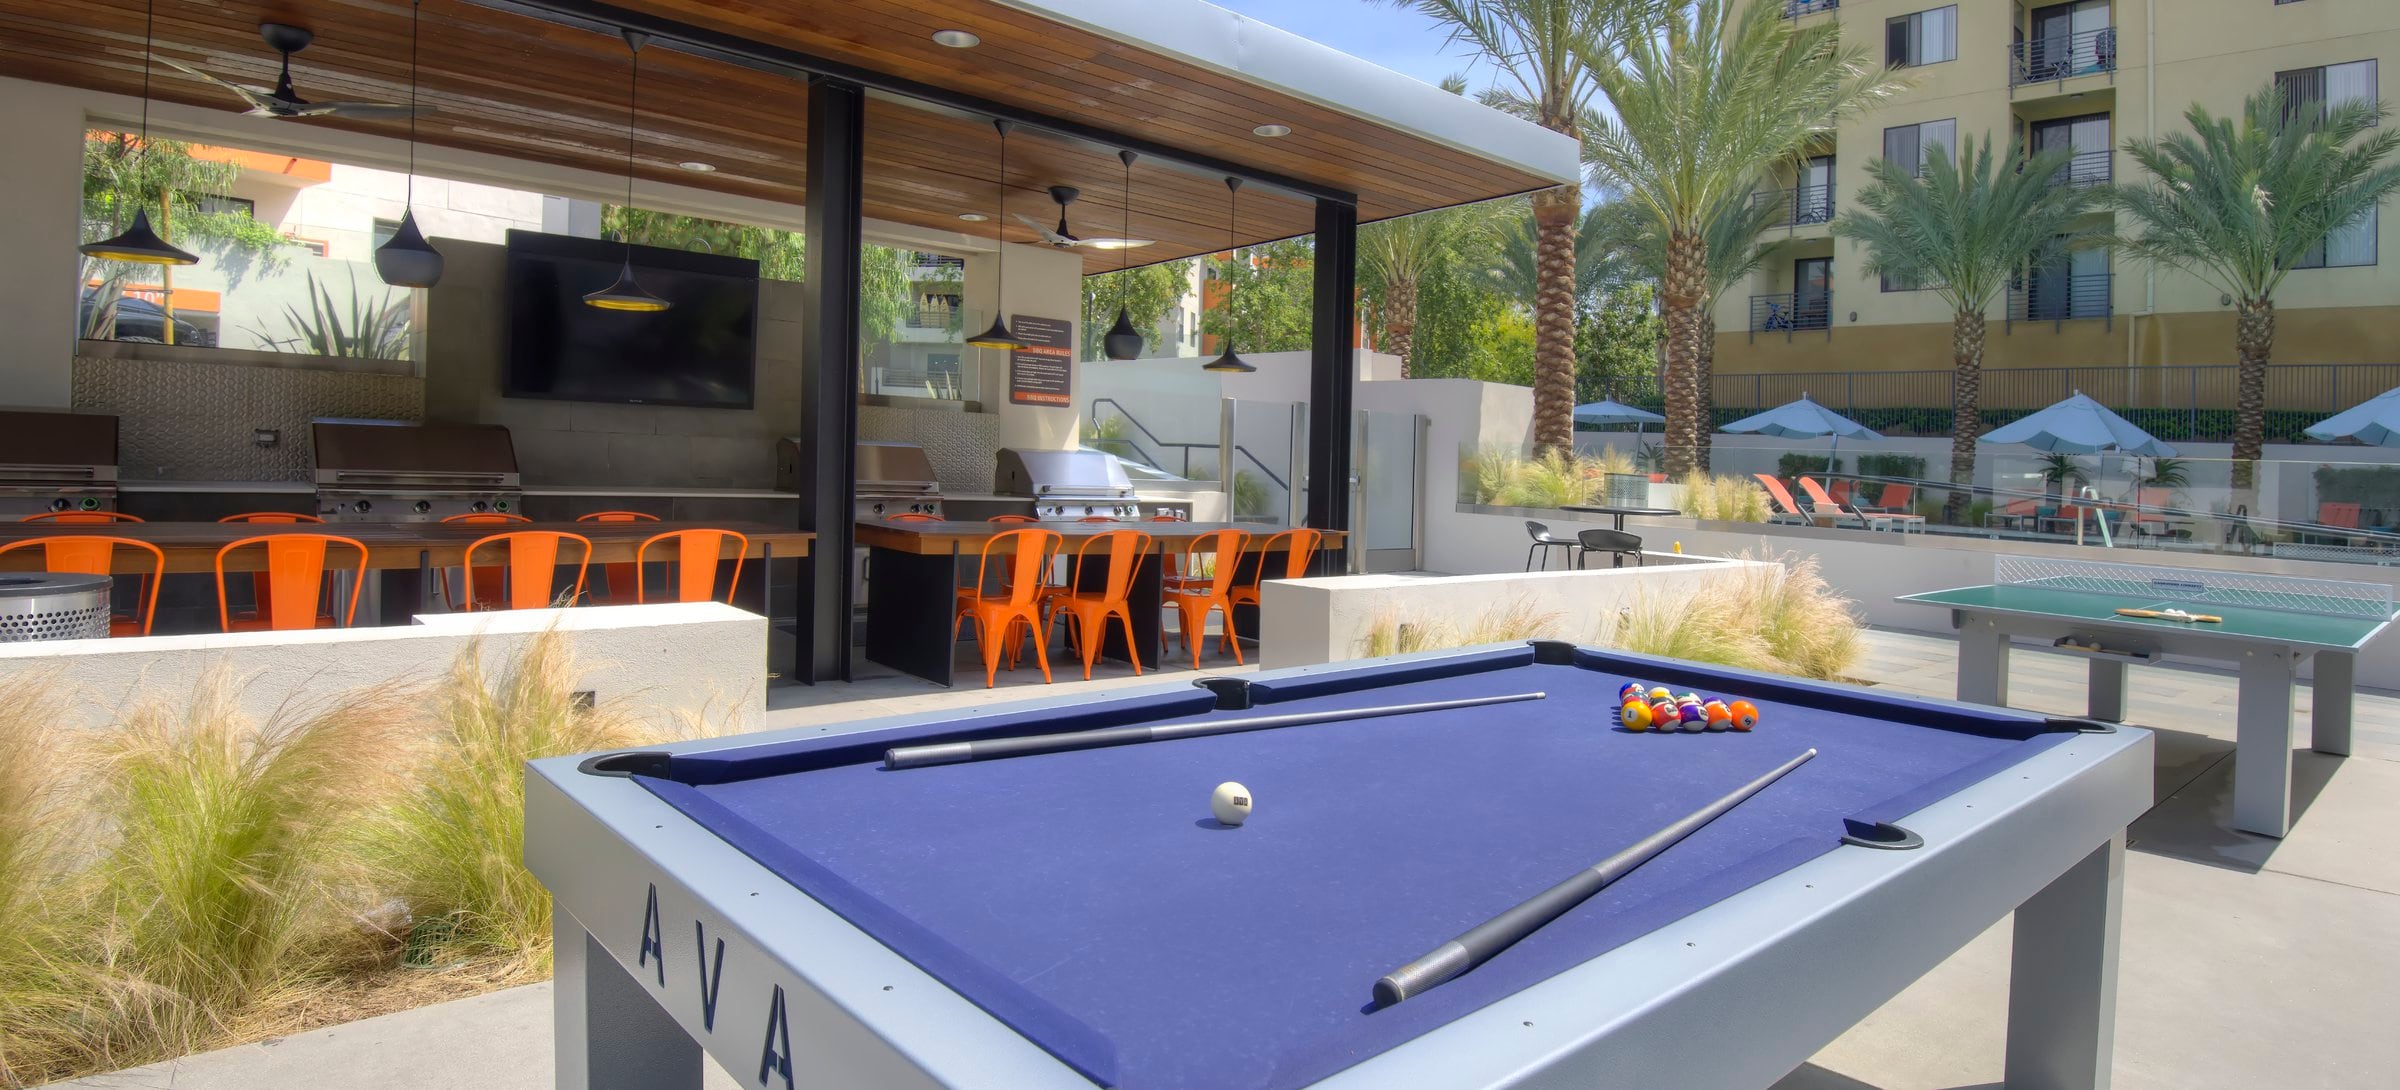 Outdoor Kitchen with Grills and Game Tables